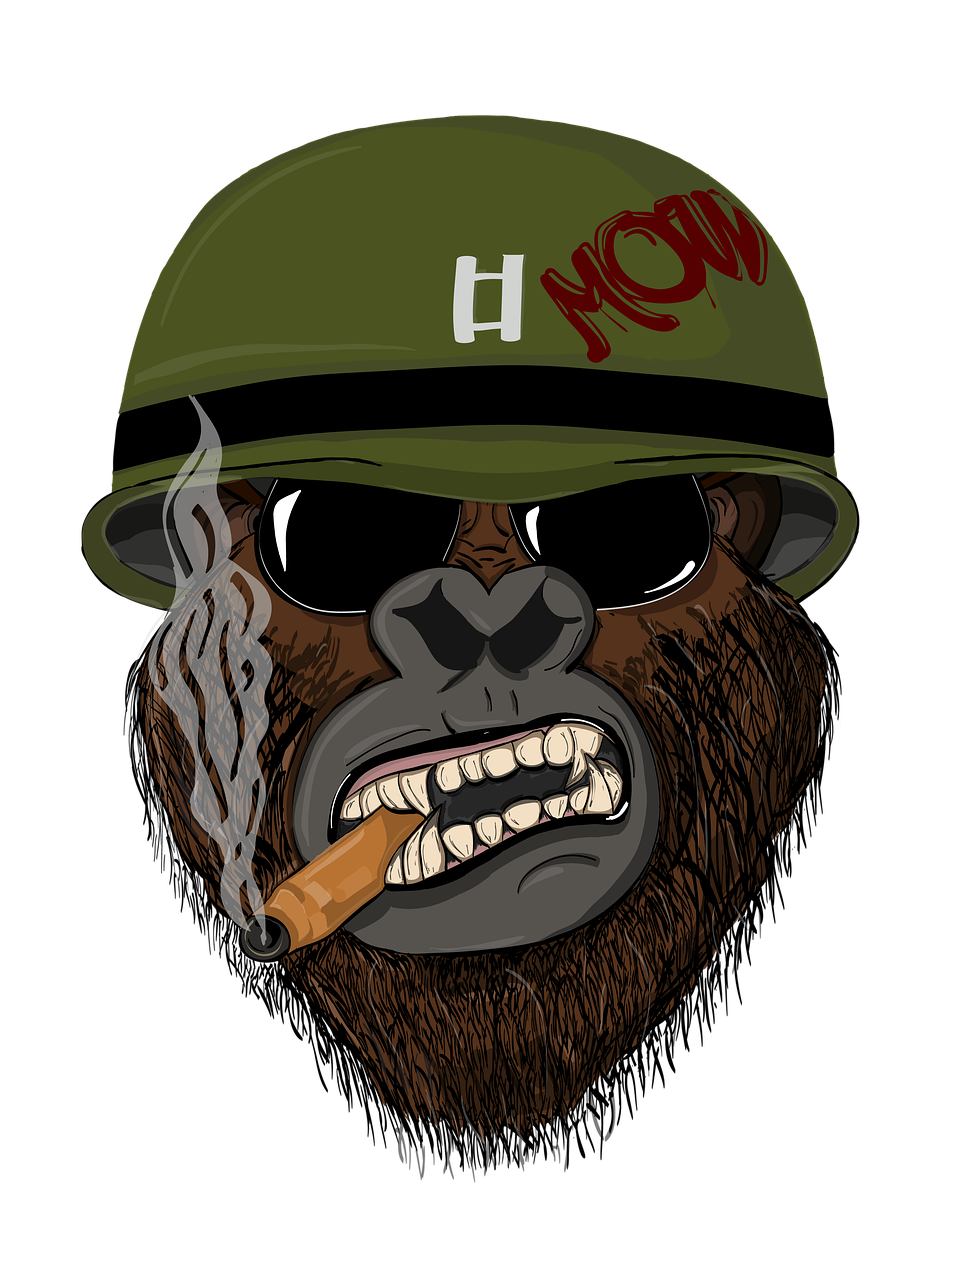 a gorilla wearing a helmet smoking a cigarette, concept art, military insignia, very humorous illustration, hiphop, h r